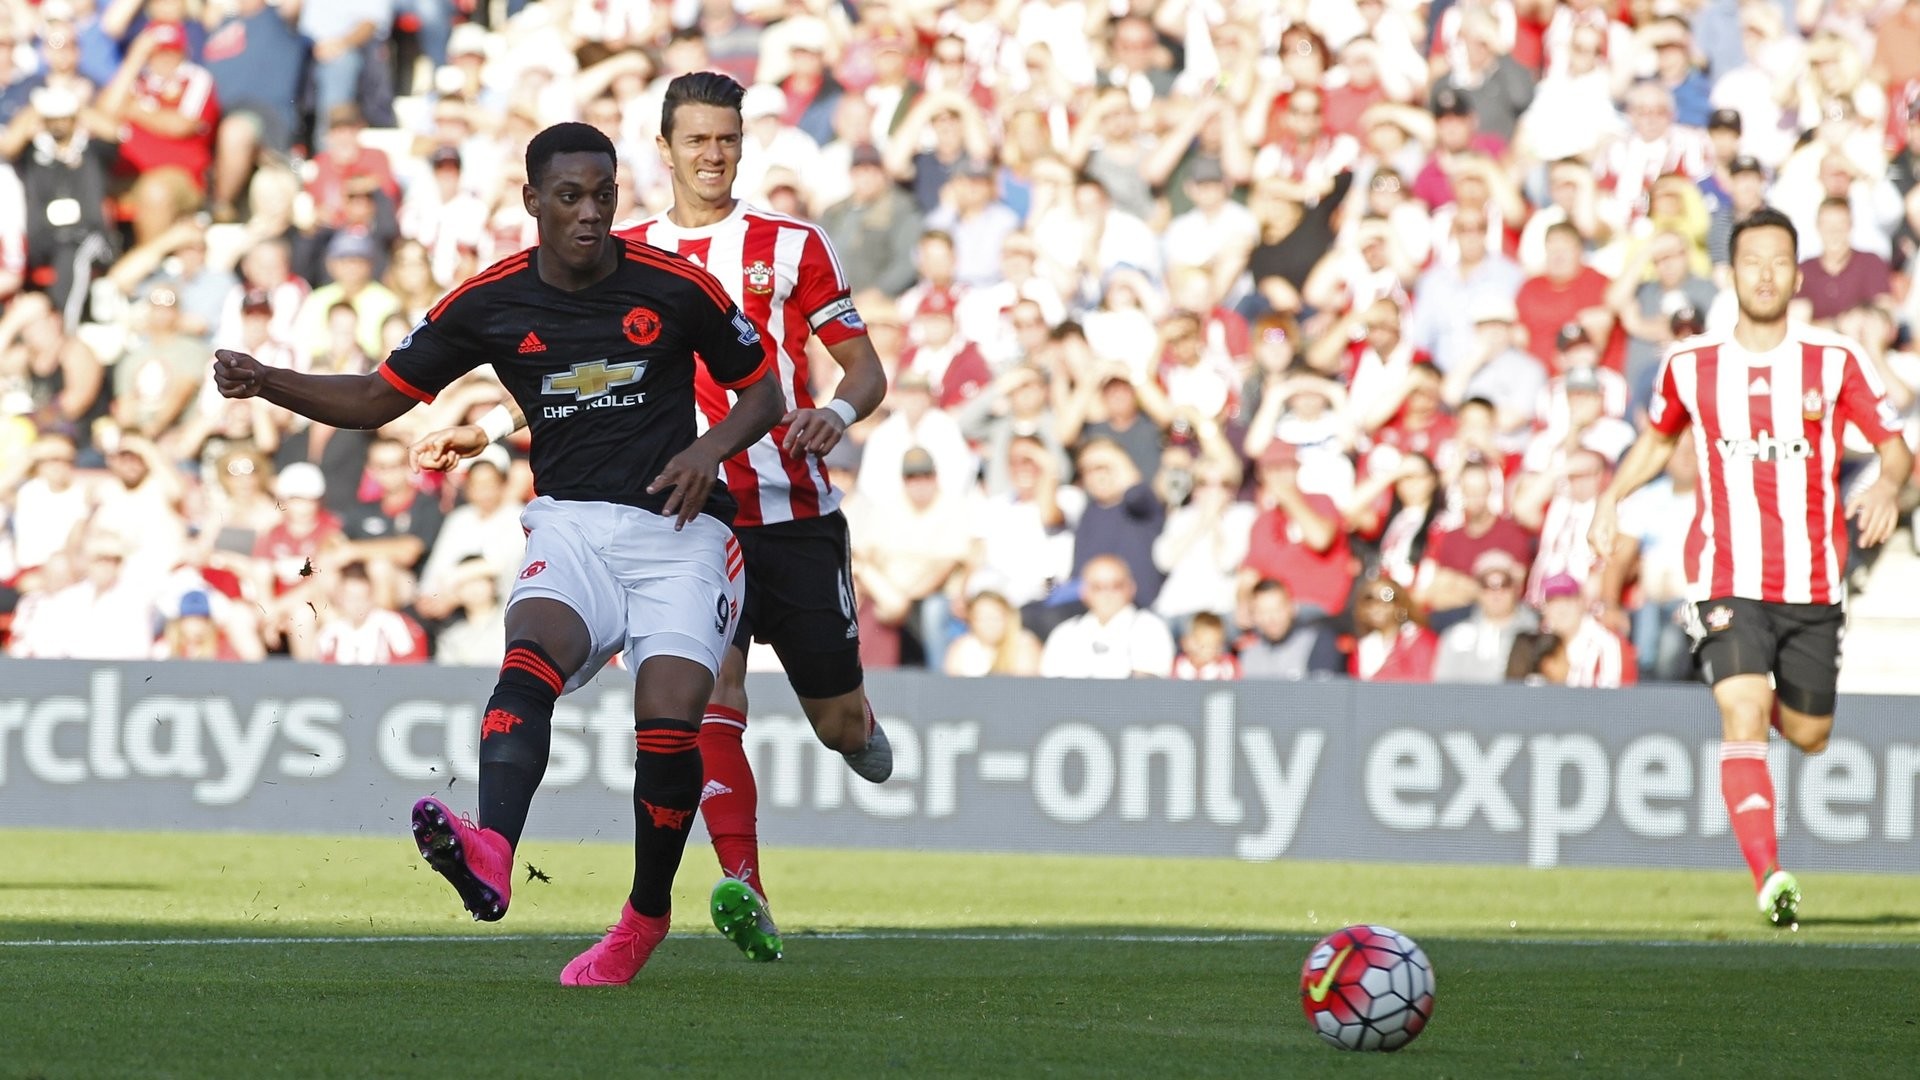 1920x1080 Manchester United Anthony Martial Score. Wallpaper ...